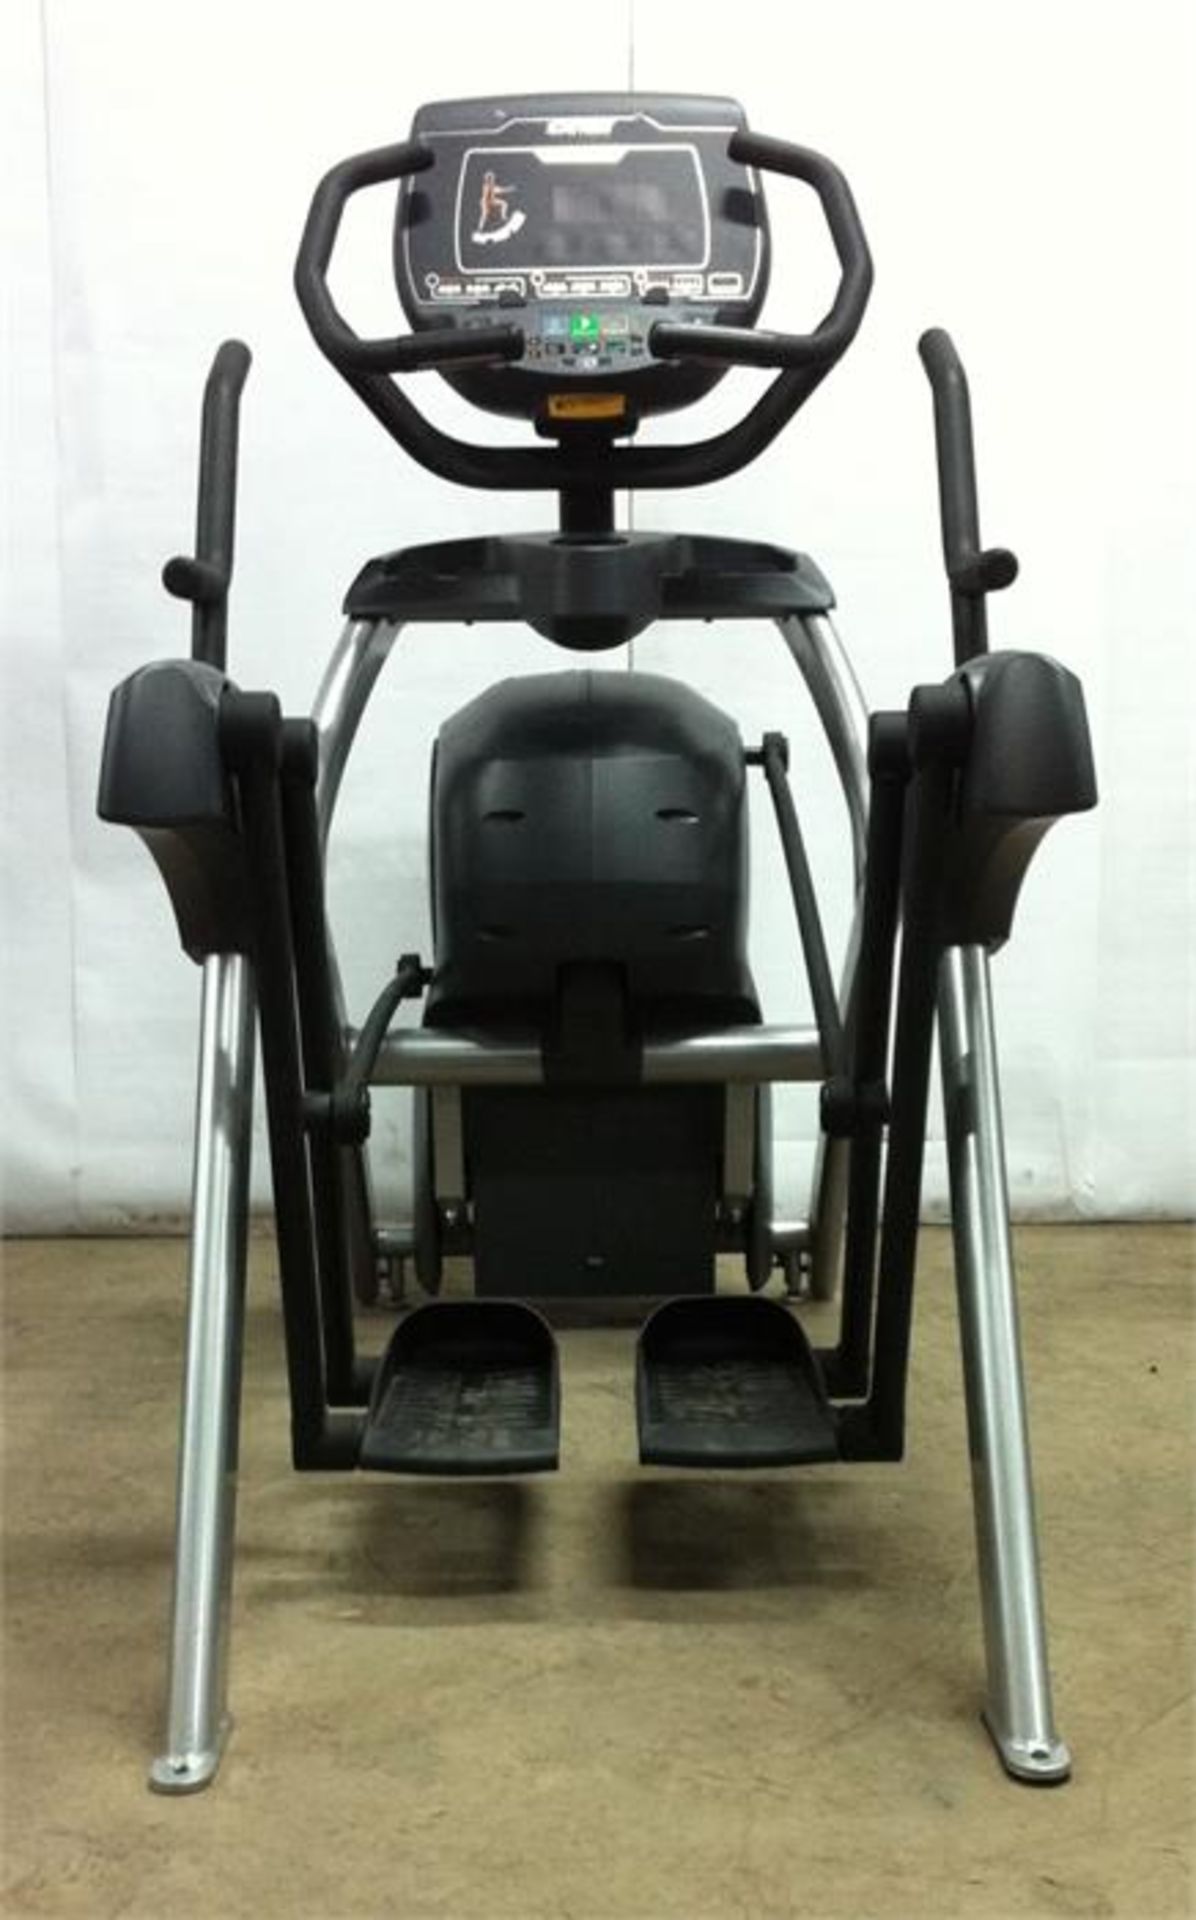 Cybex 625A Total Body Arc Trainer - Image 3 of 8